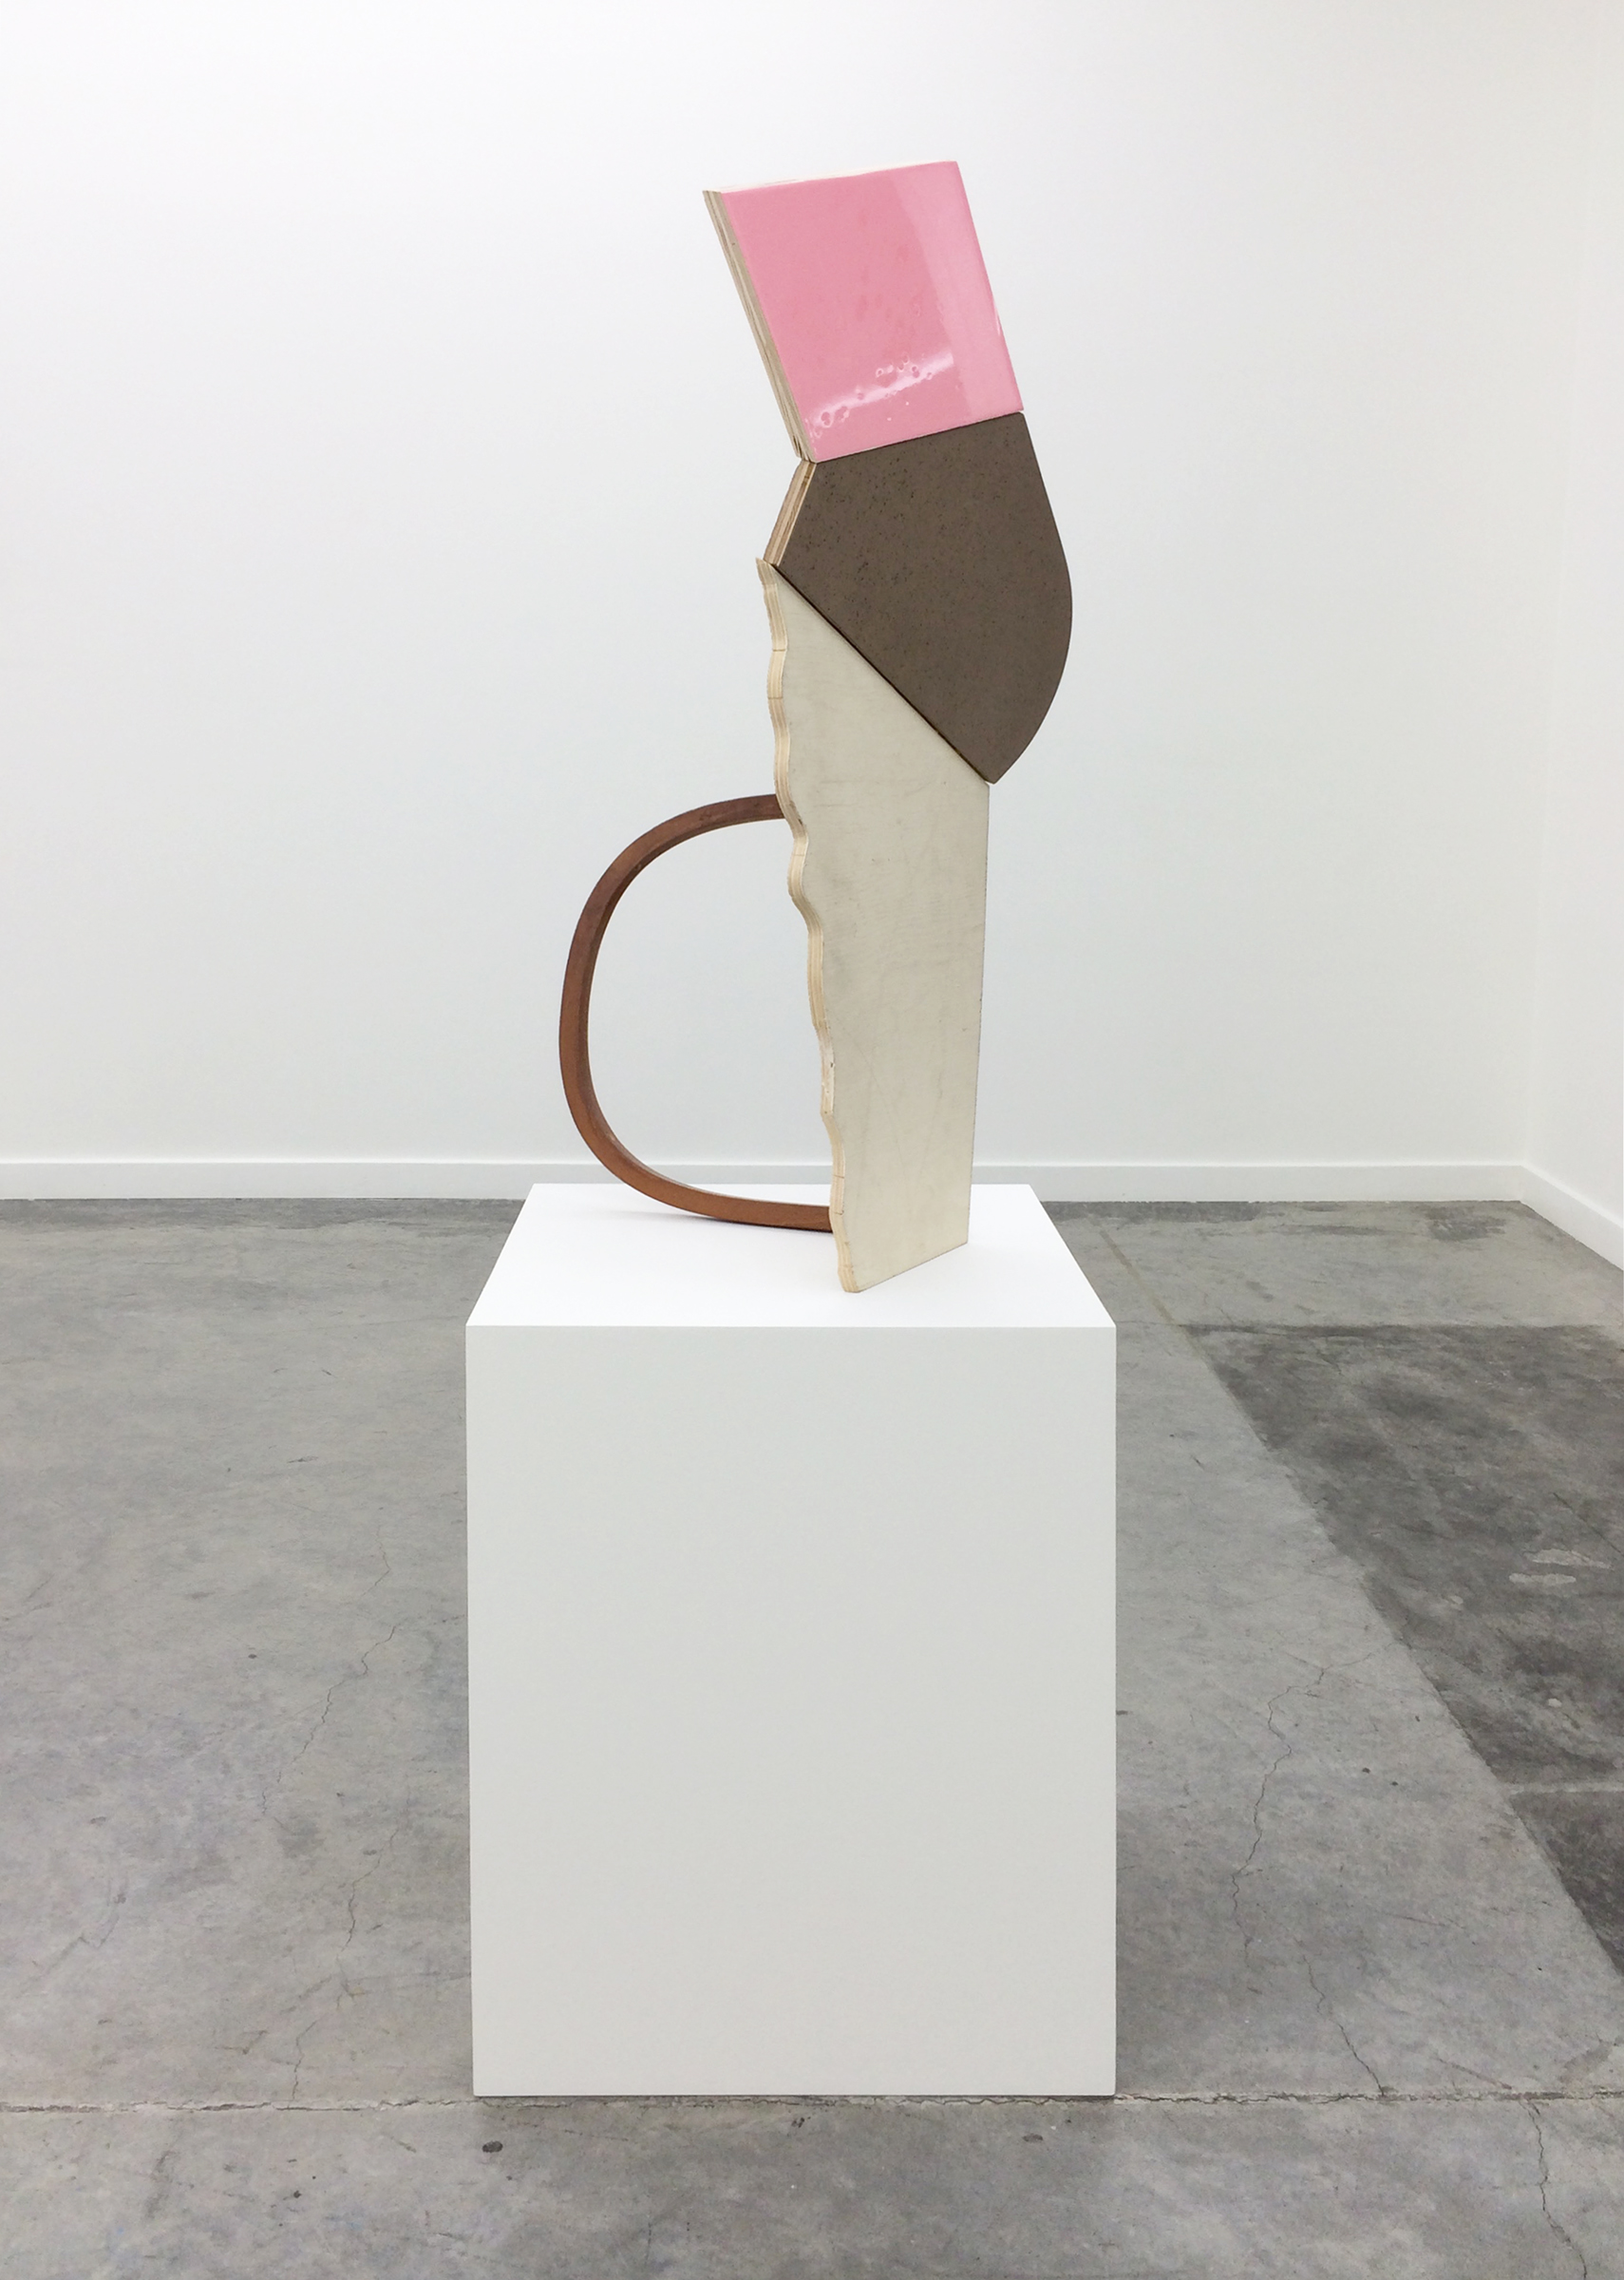   KIRK STOLLER   Untitled (shift) , wood, resin, acrylic and latex paint, wood stain, 35" x 17" x 16" 